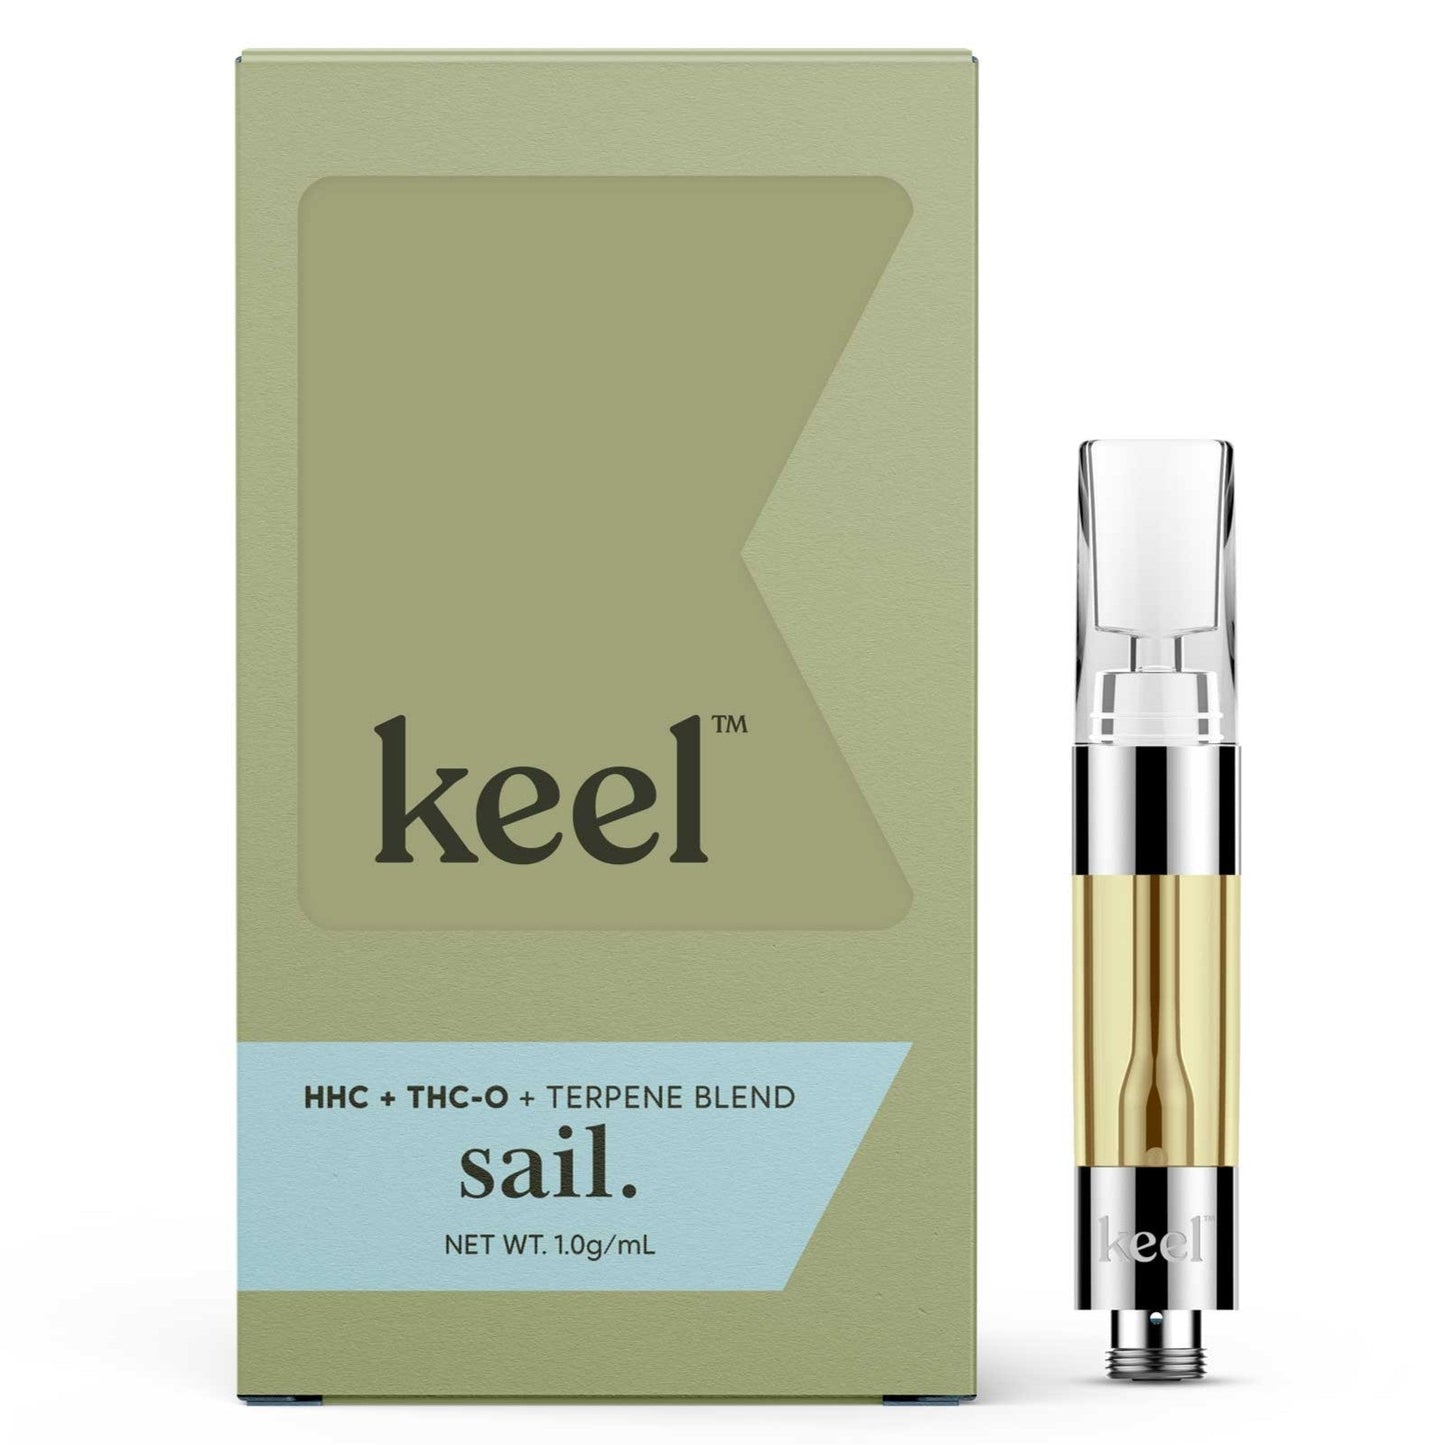 Keel Blends CBD Extract Pre-Filled Cartridge (1g) 💨 by Keel | Mission Dispensary